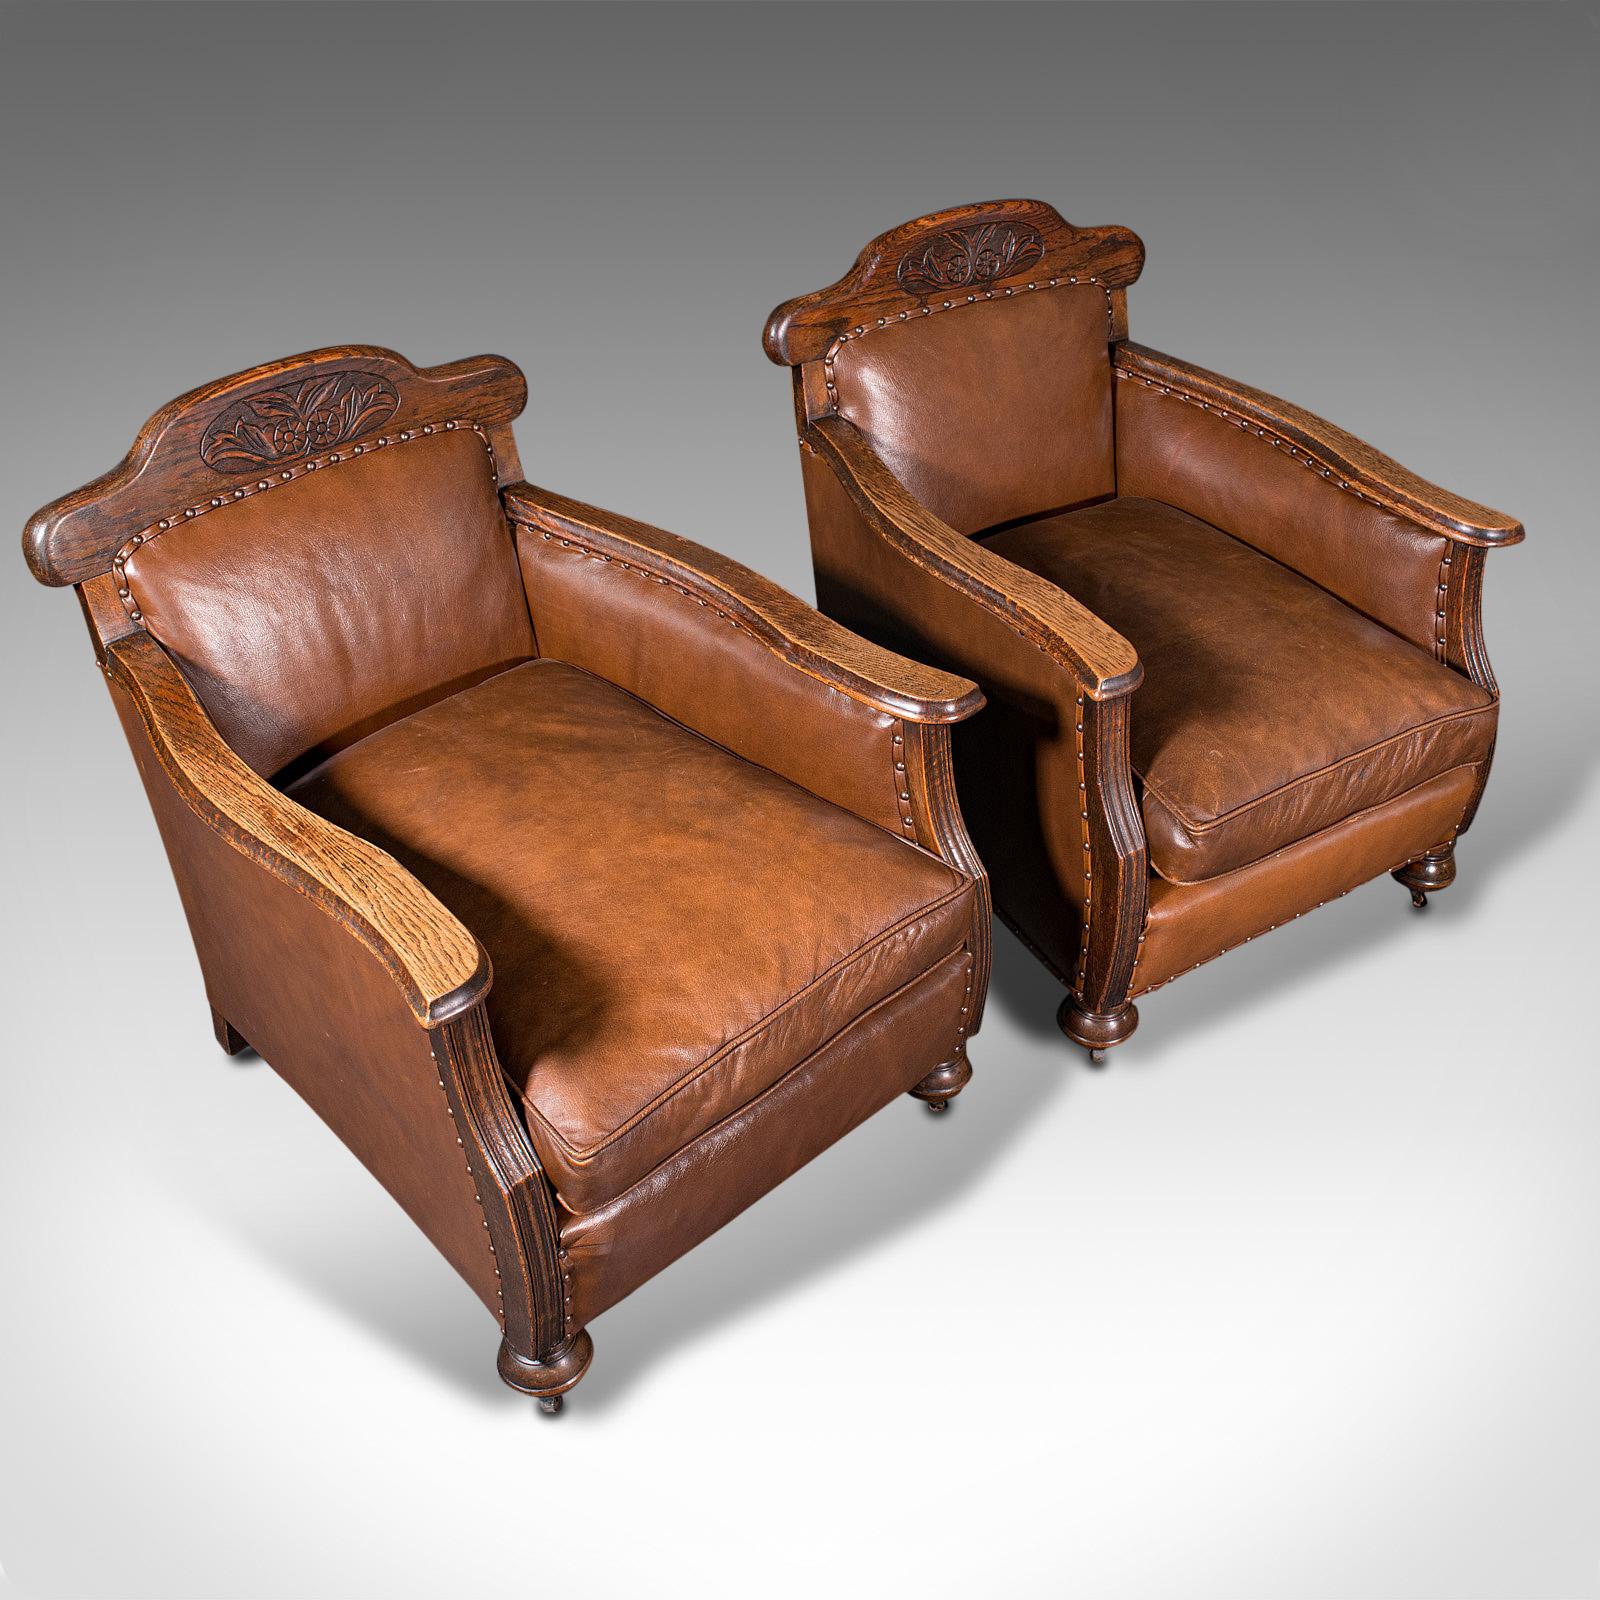 Pair of, Antique Gentleman's Club Chairs, Leather, Fireside, Seat, Edwardian 1